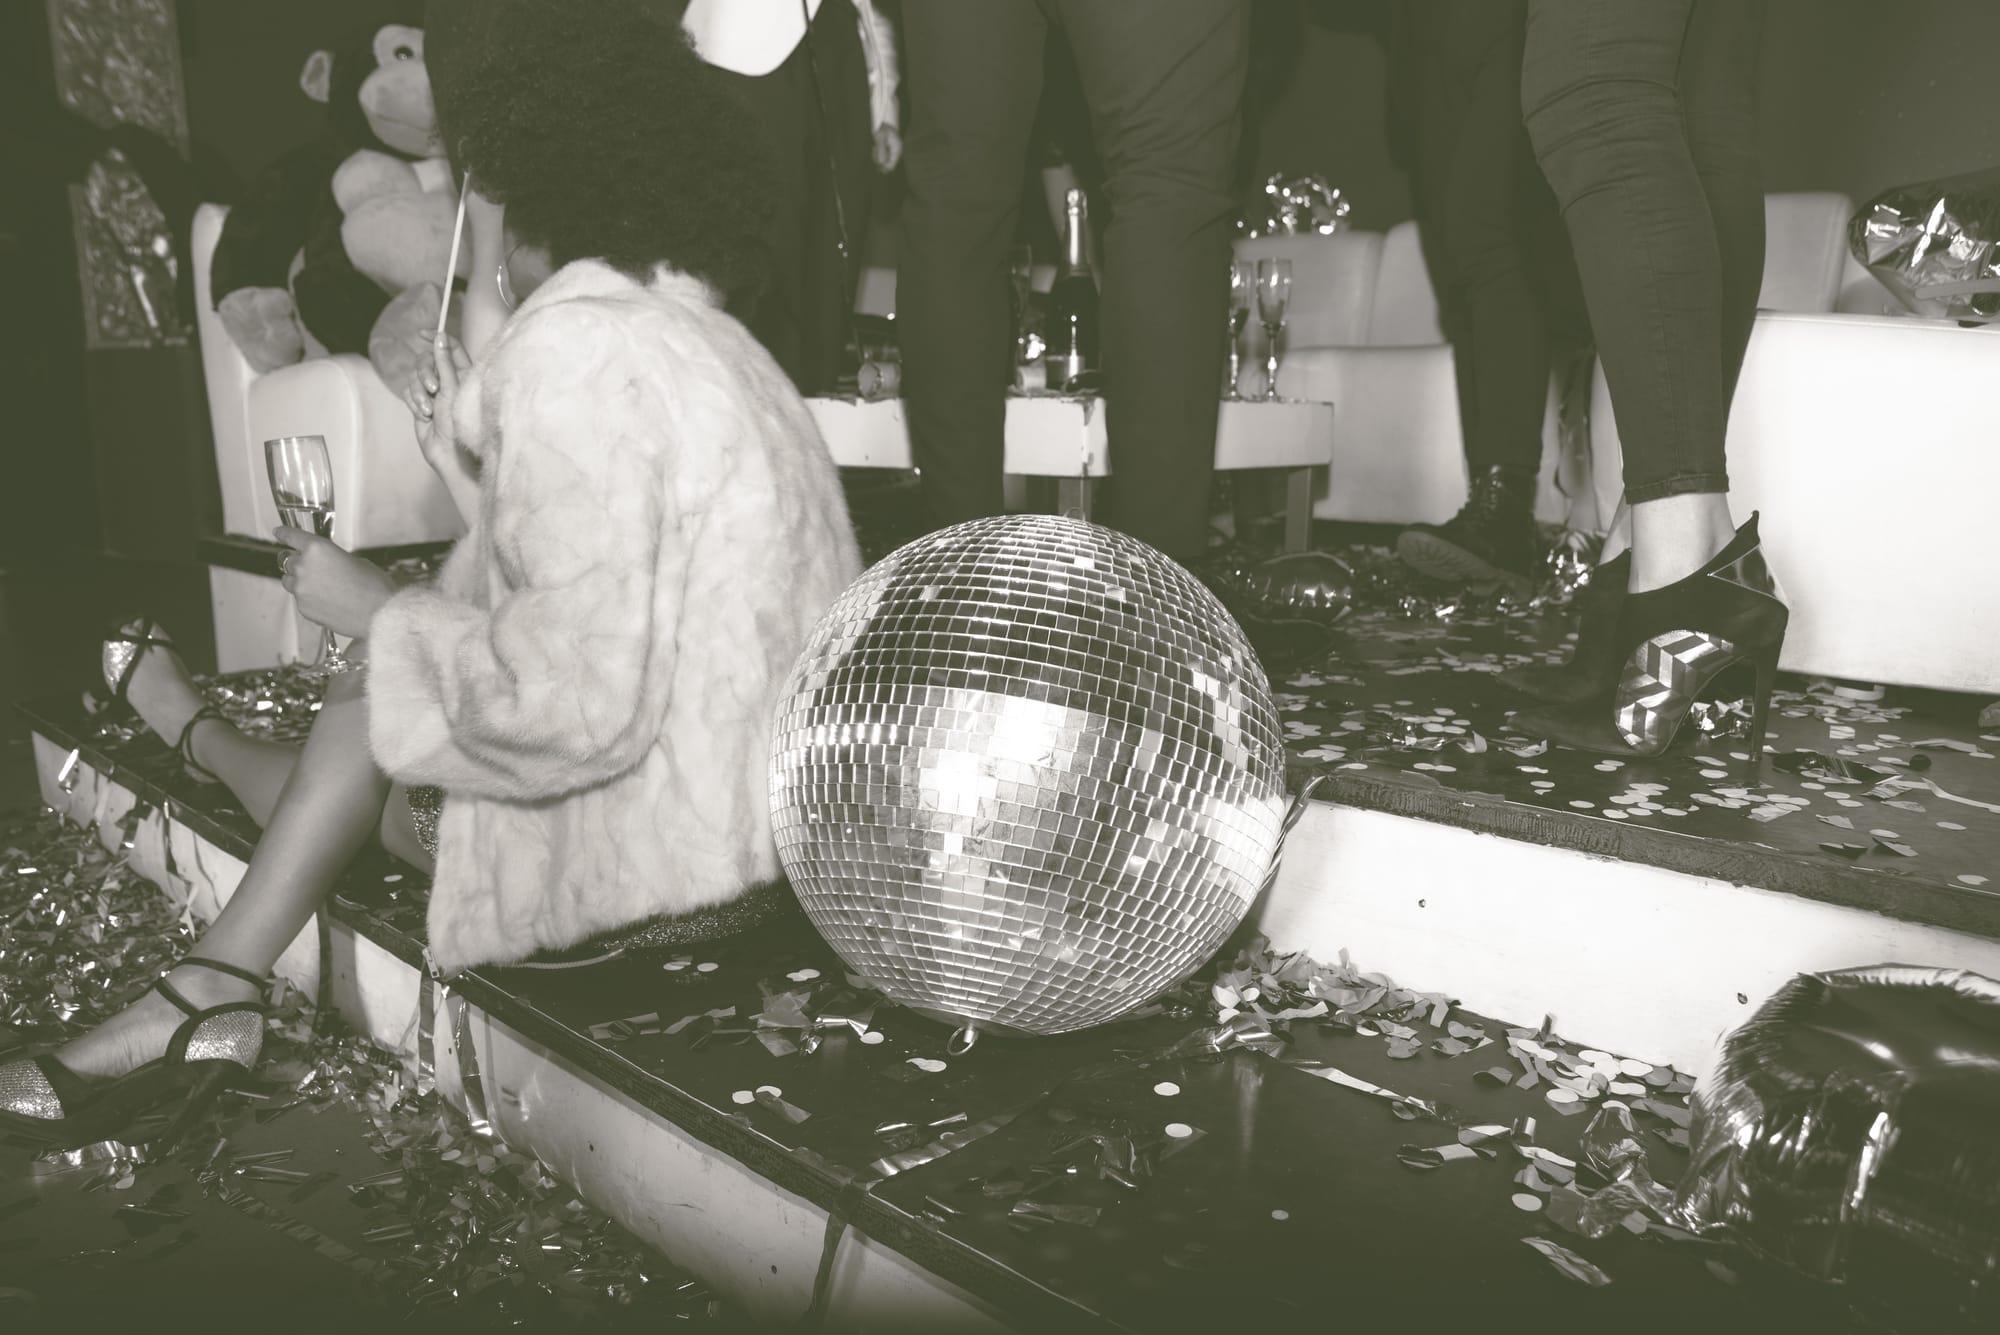 A lady in black satin heels and a white plush jacket seated next to a mirror ball on the steps of a nightclub; her back is to us ad she's holding a champagne flute. Behind her we can see a big stuffed chimp on a long white banquette, a bottle of champagne and more flutes on a low table, and the booted legs and high heels of fellow partygoers